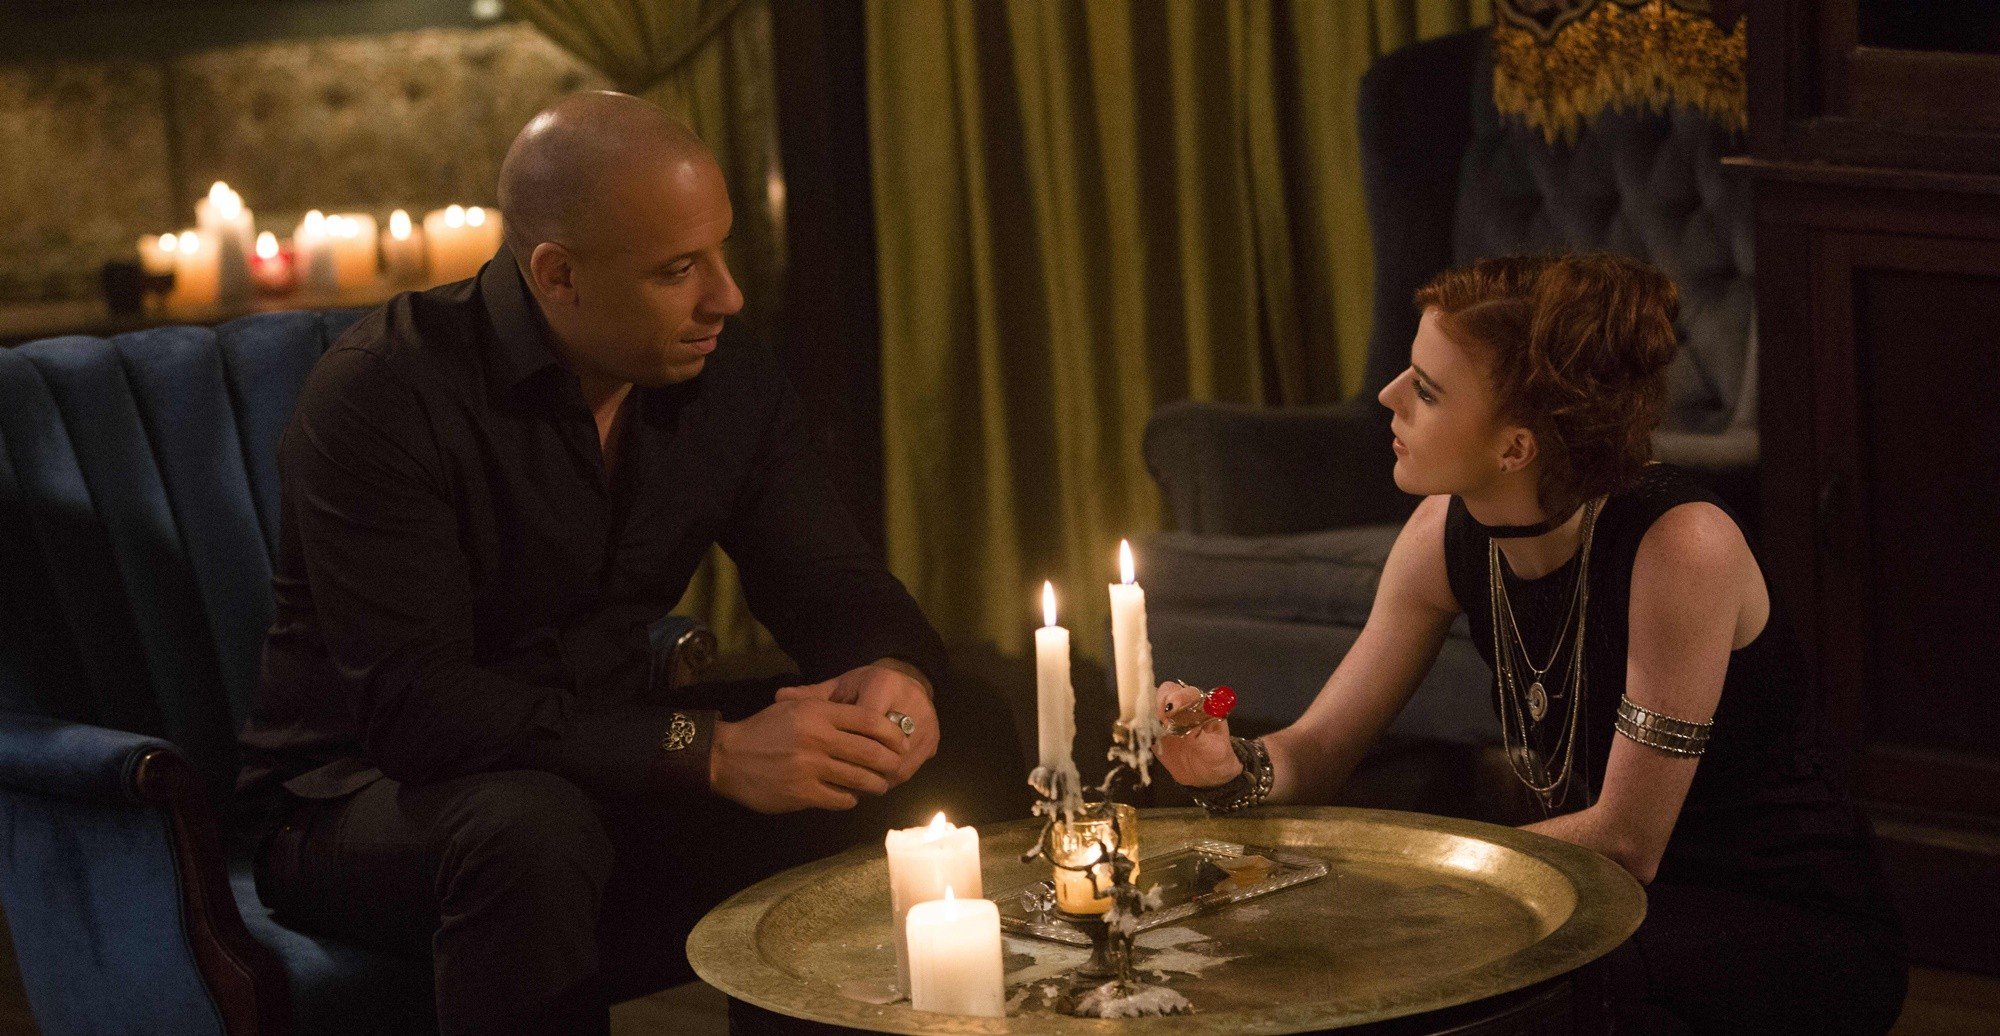 Vin Diesel stars as Kaulder and Rose Leslie stars as Chloe in Summit Entertainment's The Last Witch Hunter (2015)